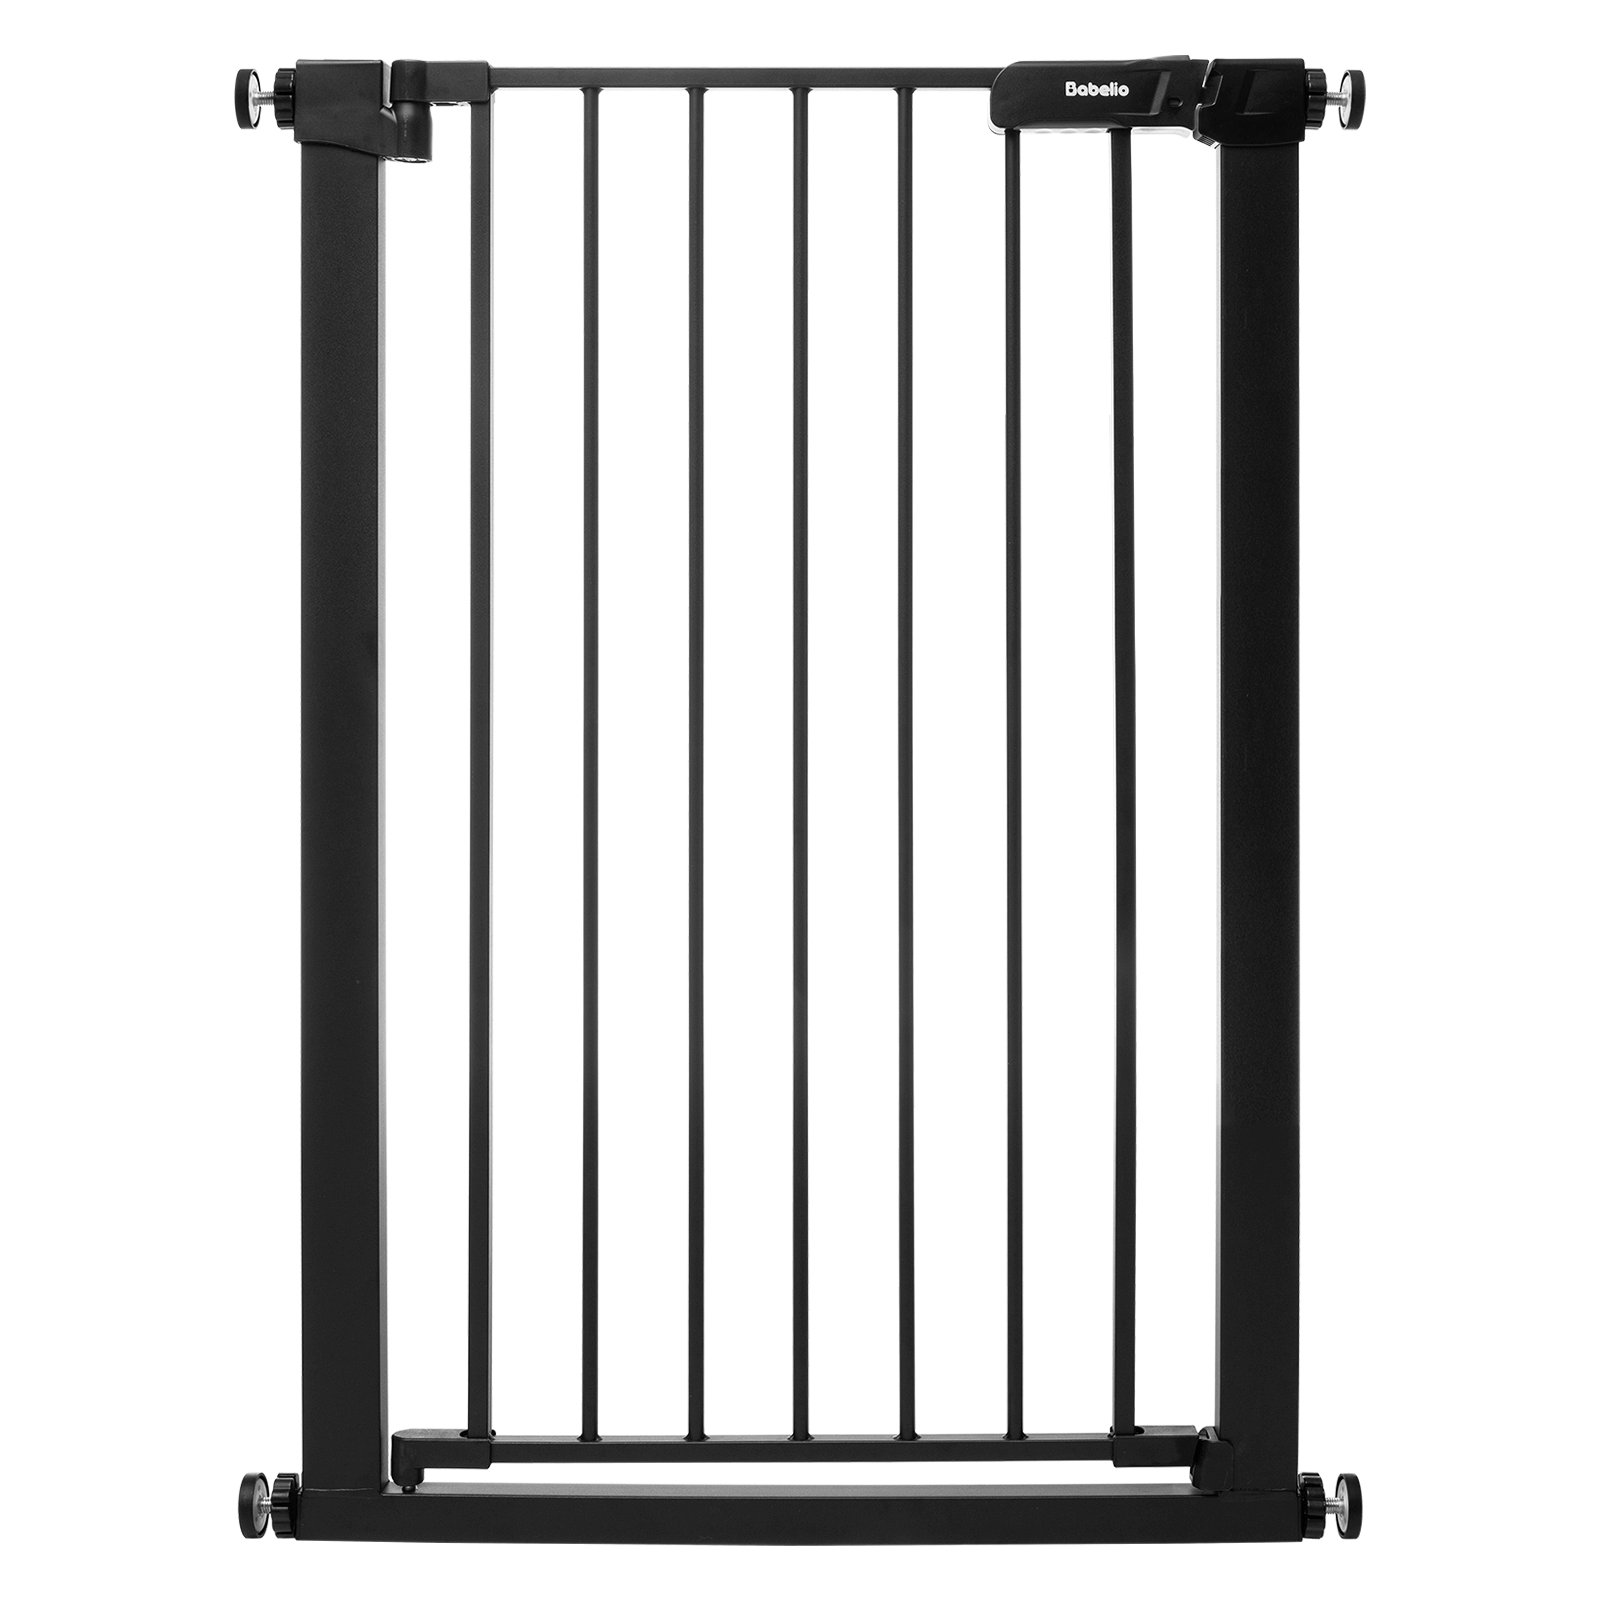 Babelio Narrow Baby Gate – Auto-Close, Pressure Mounted, Easy Install, 27-30" Wide, Safe for Kids & Pets